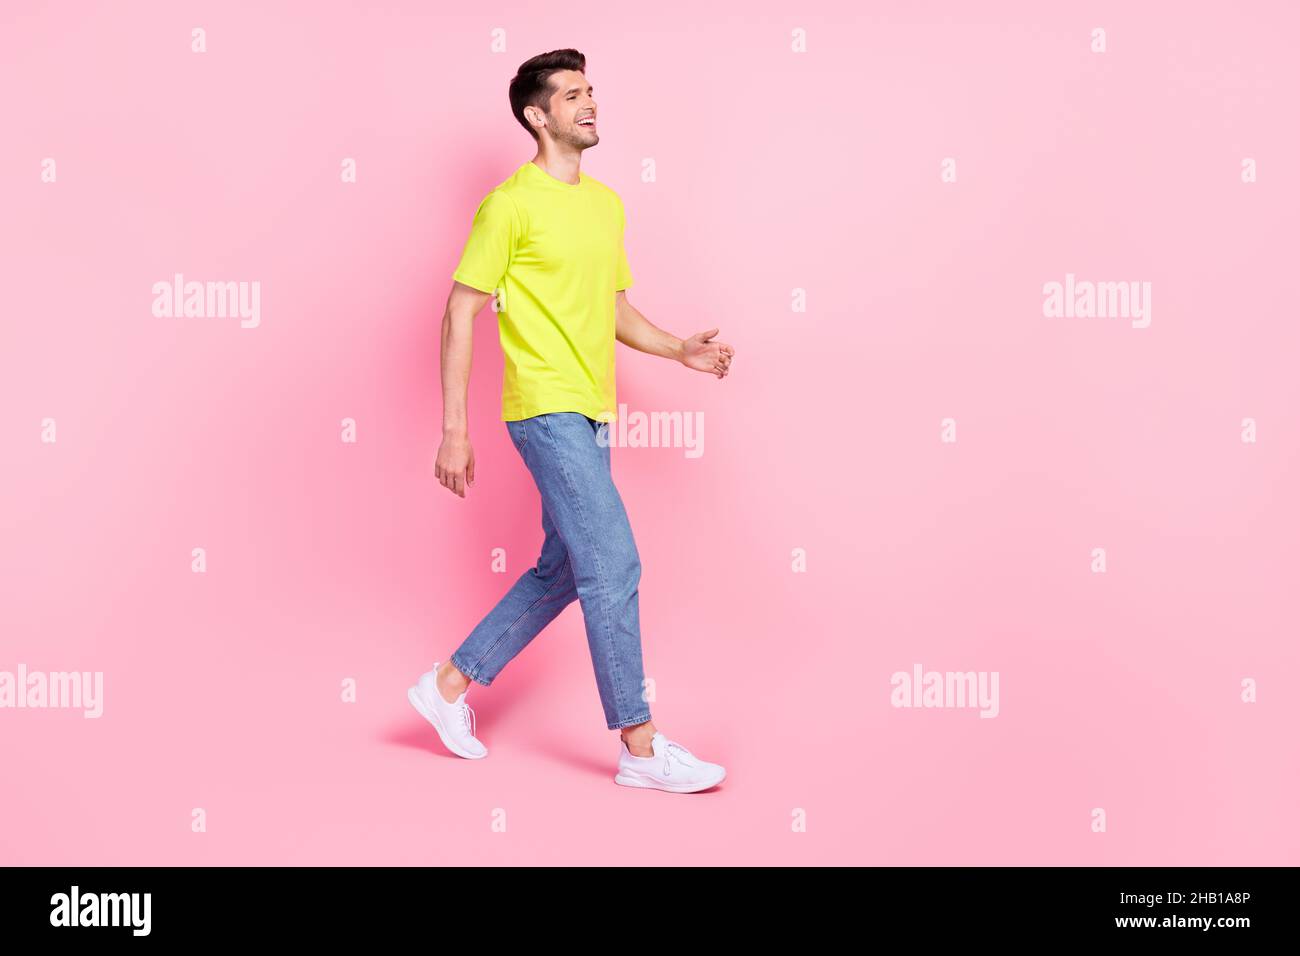 Full length body size photo man smiling in stylish outfit walking forward looking copyspace isolated pastel pink color background Stock Photo